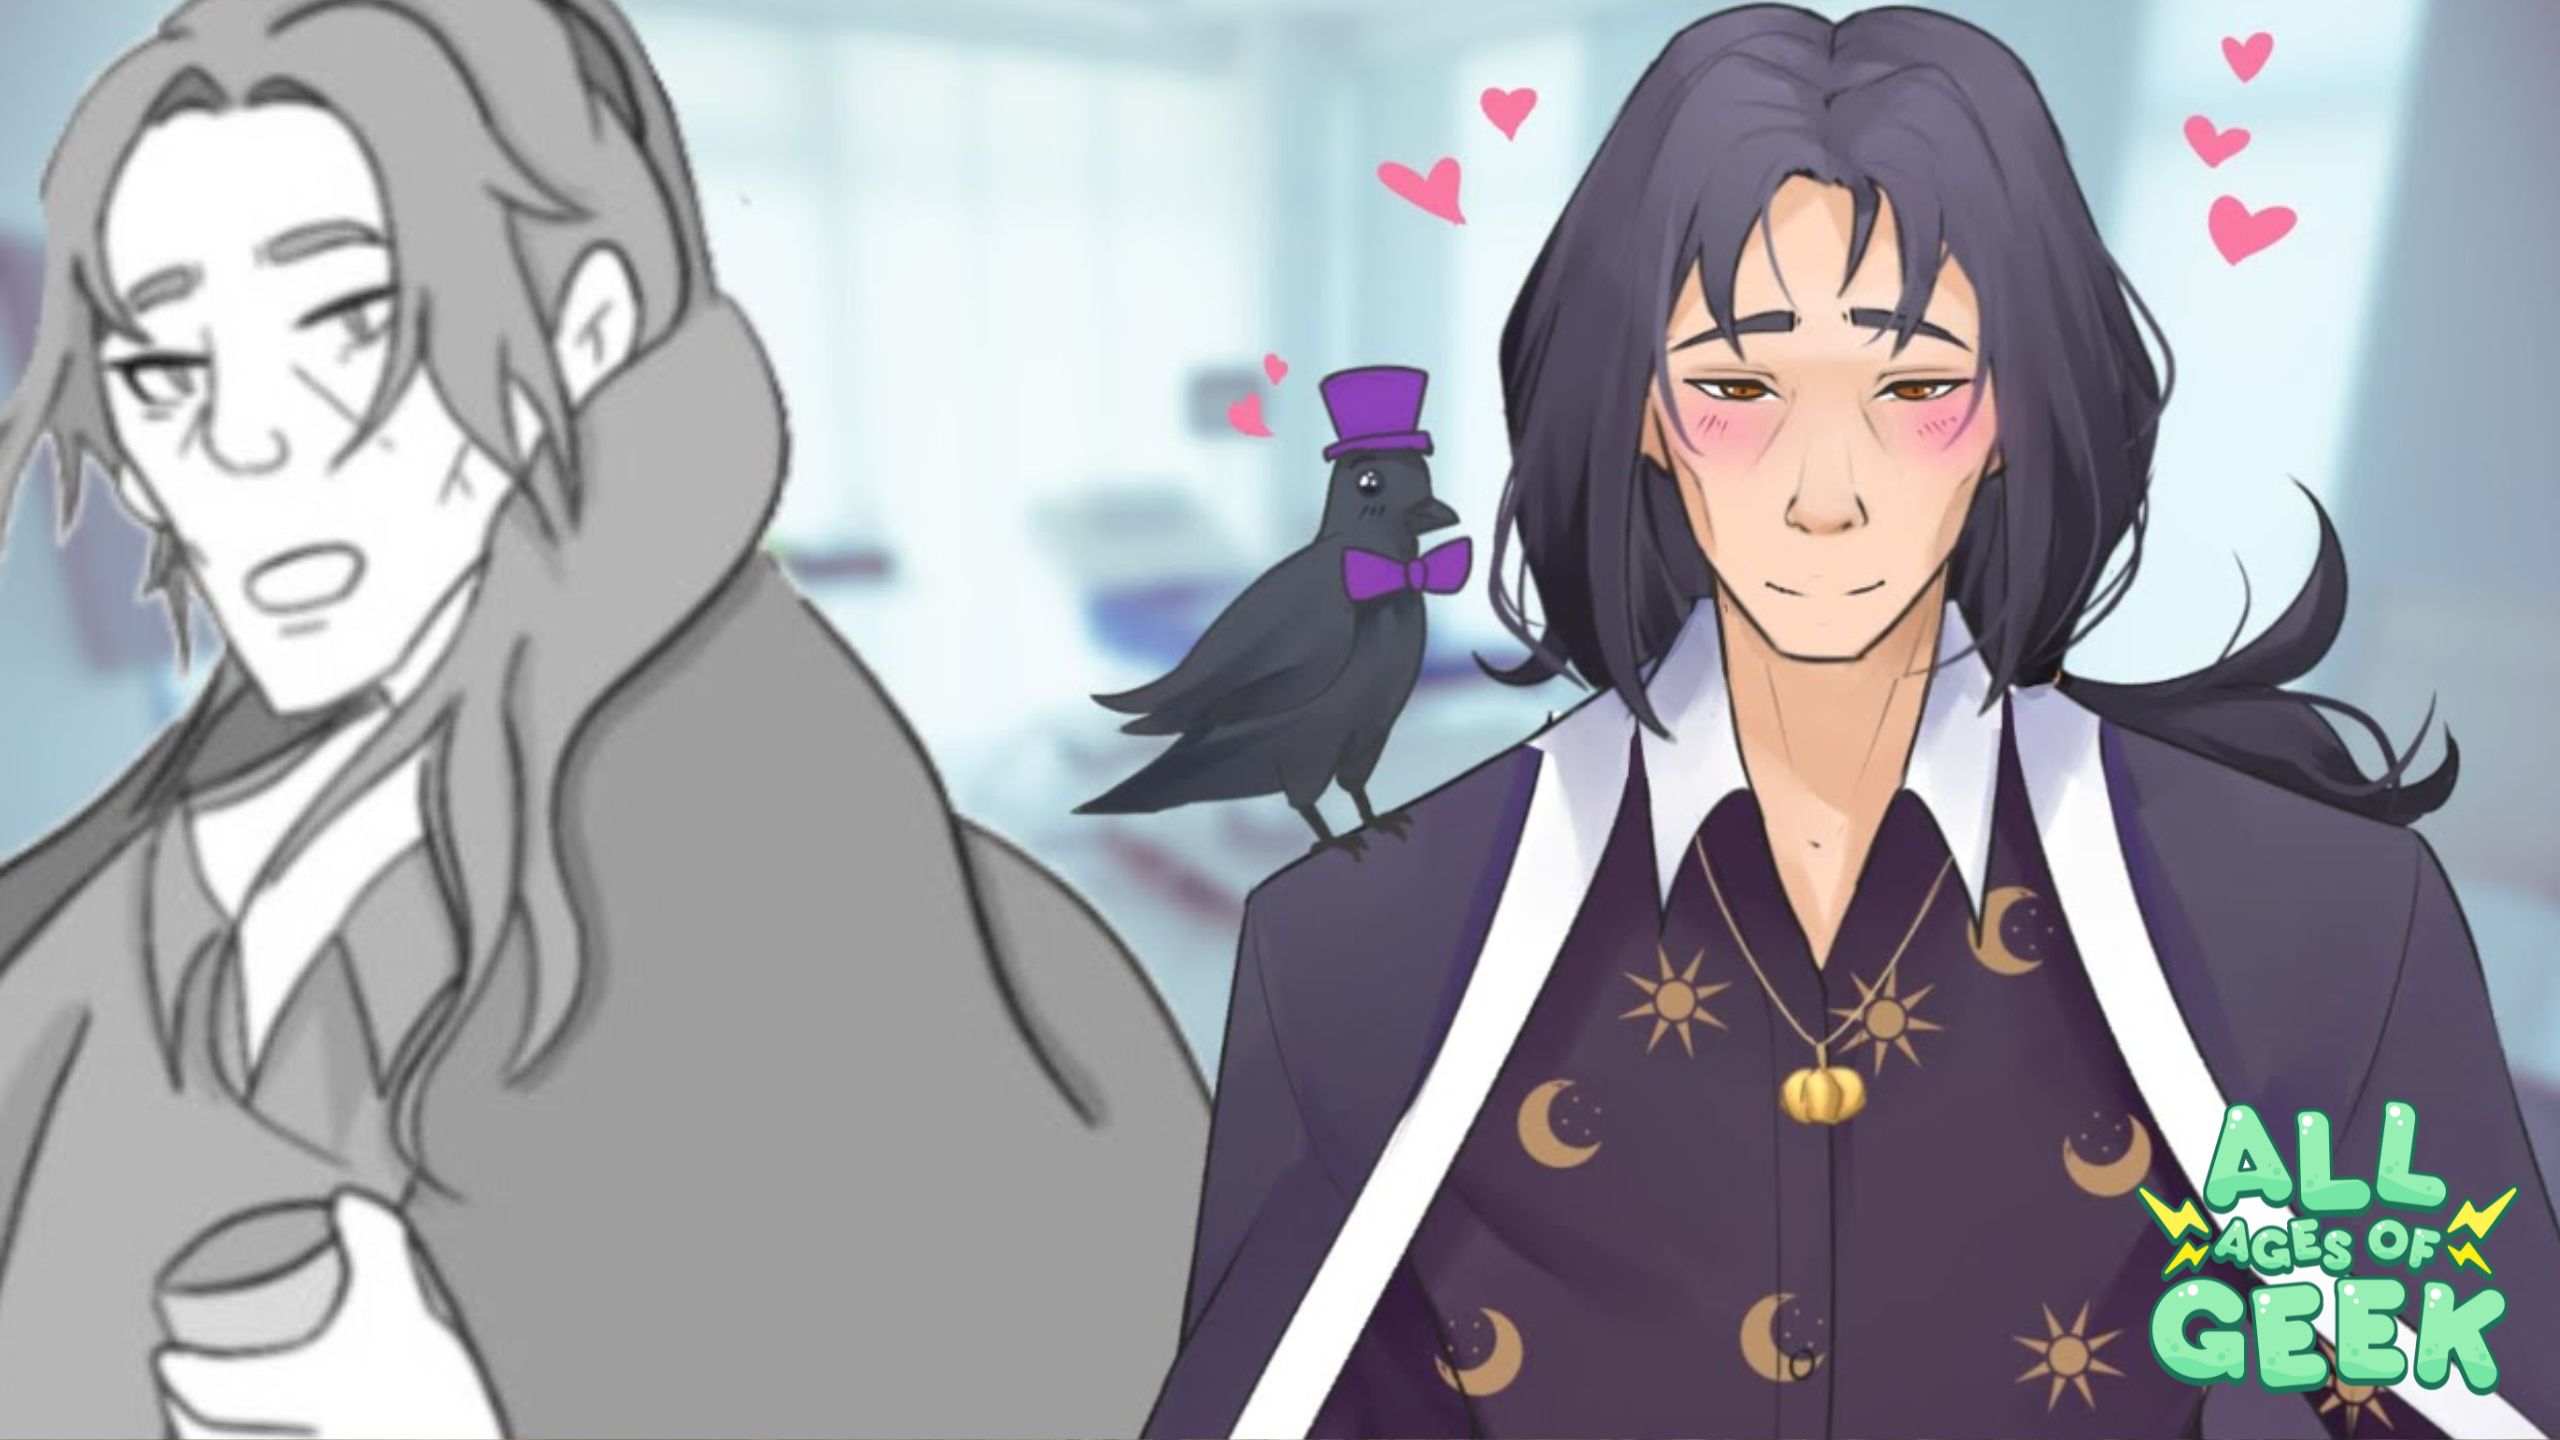 Illustration featuring a character from "I Married a Monster on a Hill." On the left, a monochrome sketch of a character with long hair and a drink in hand. On the right, a color image of a character with long dark hair and a gentle smile, wearing a shirt with celestial designs, a necklace, and accompanied by a crow with a bow tie and top hat on his shoulder. Pink hearts are floating above the crow. The All Ages of Geek logo is in the bottom right corner.